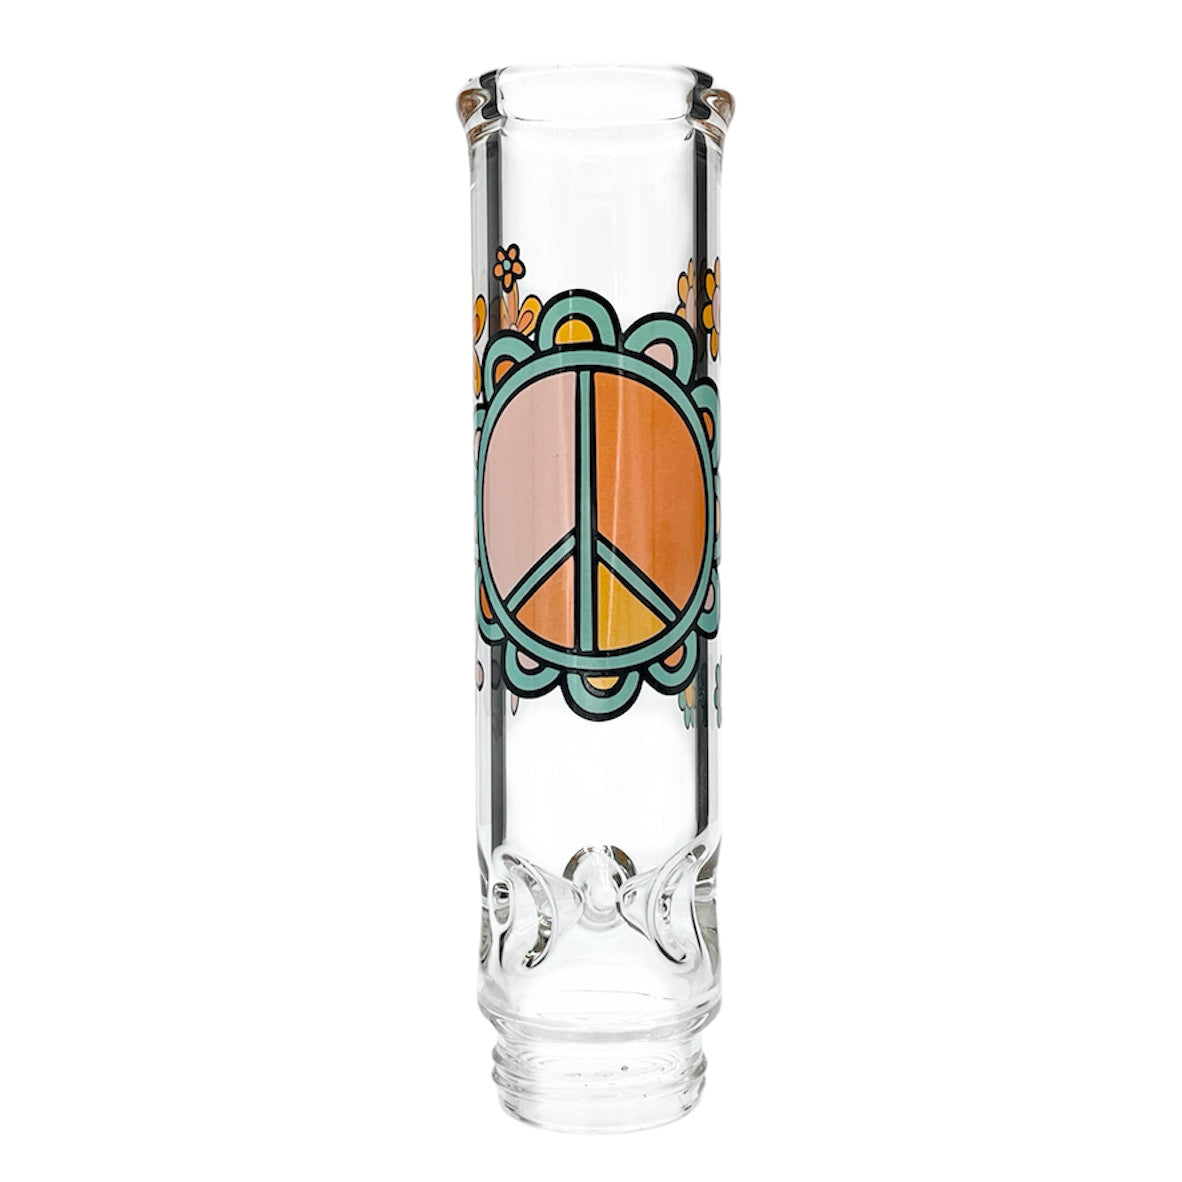 Custom Bongs Done Right. Prism addresses the issues of traditional water pipes making custom bongs possible. With a variety of bong styles you can create your own custom bong whether its a tall bong or small bong. A custom bong makes it easy to have a clean bong and travel bong. Build a new custom bong as the best bong